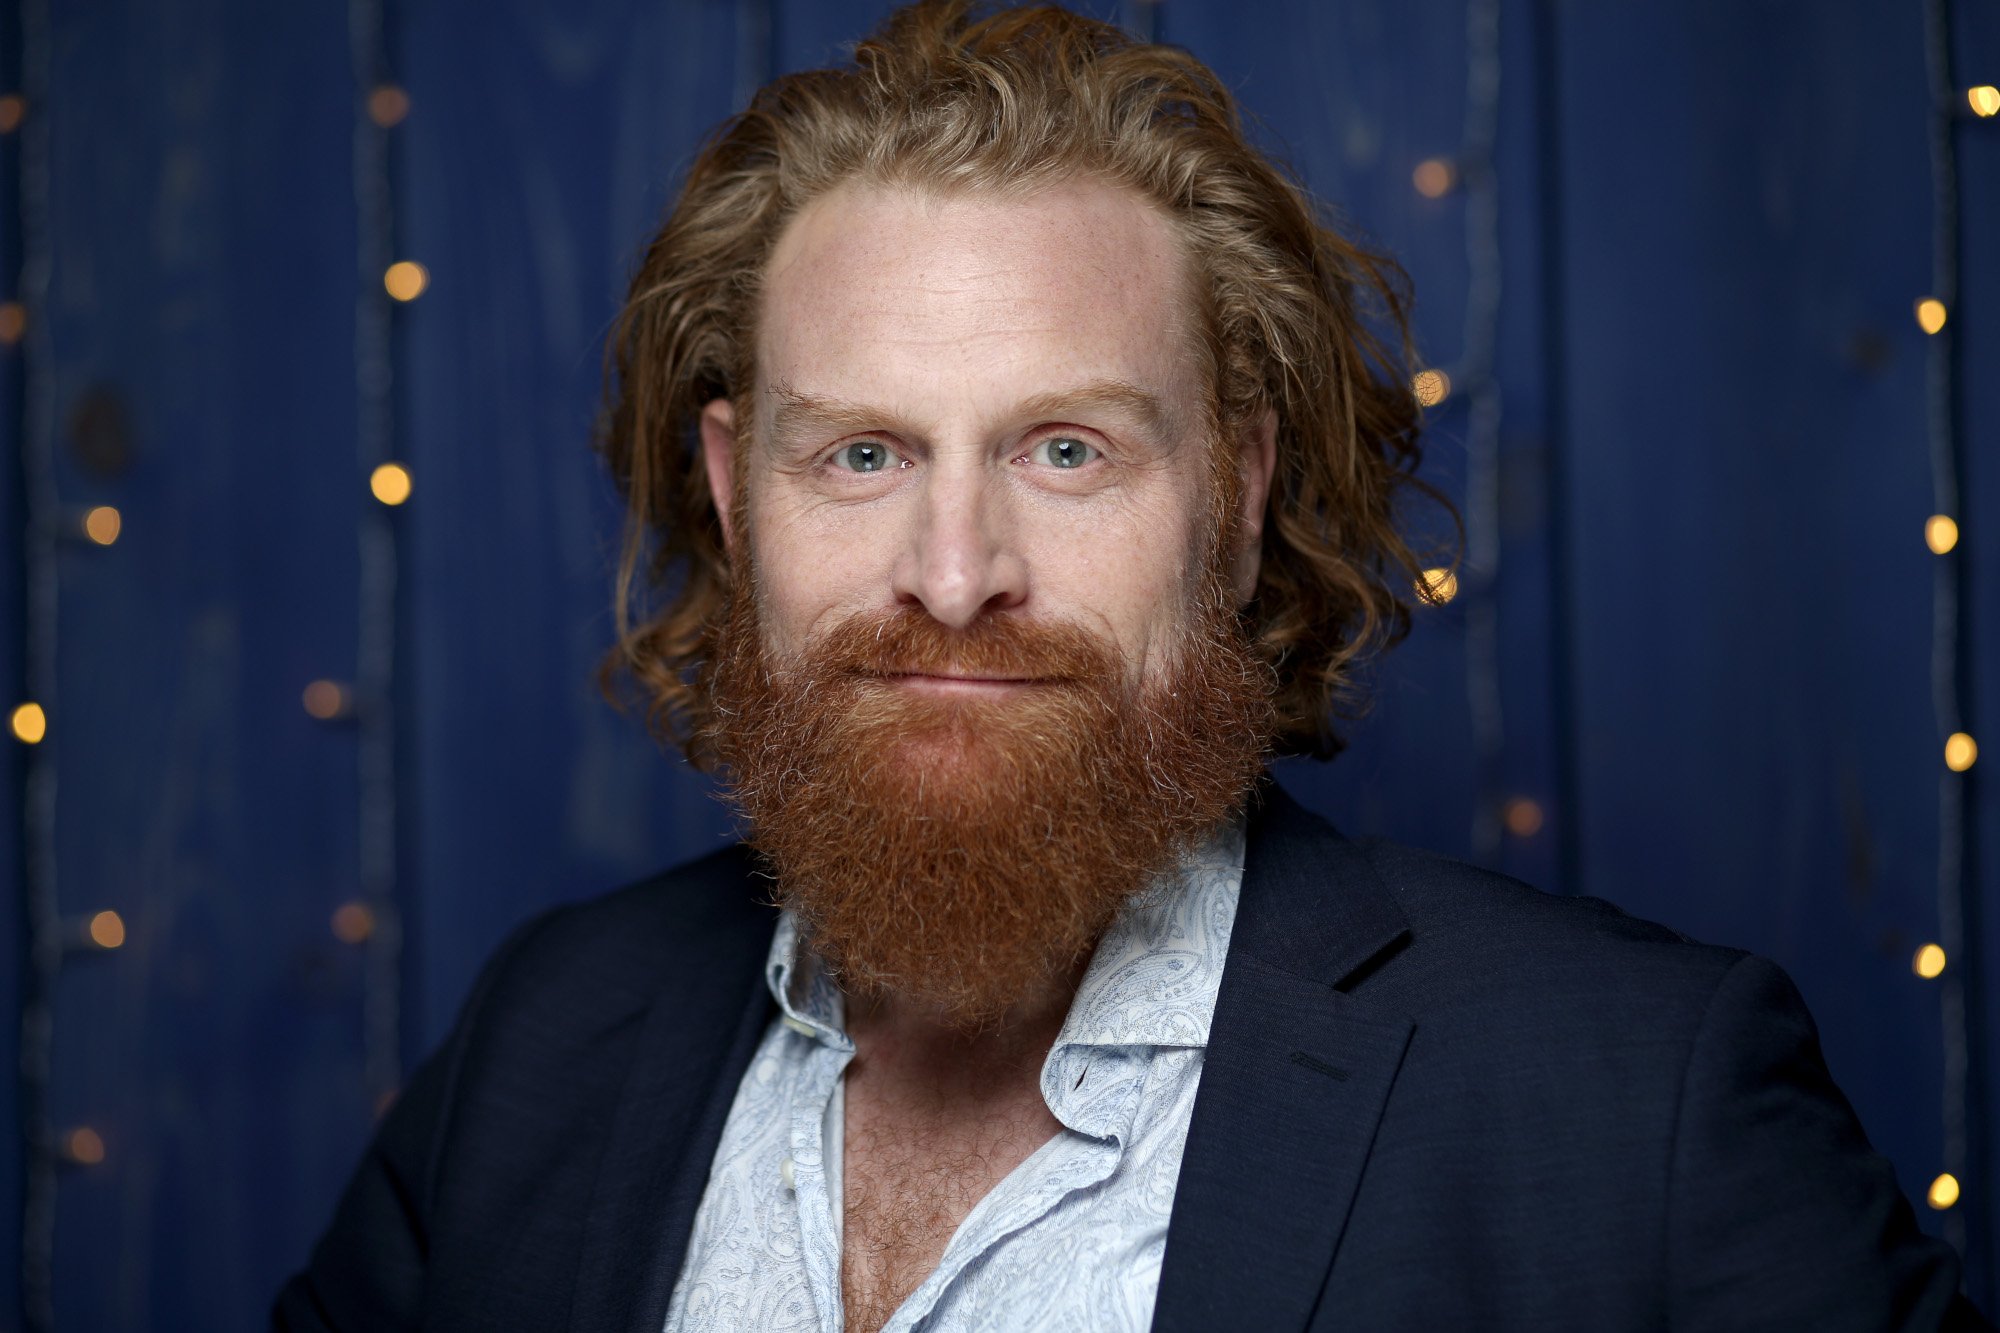 'Game of Thrones' and 'The Witcher' Season 2 star Kristofer Hivju. He's wearing a white button-up shirt and black jacket, and his red hair is slicked back.